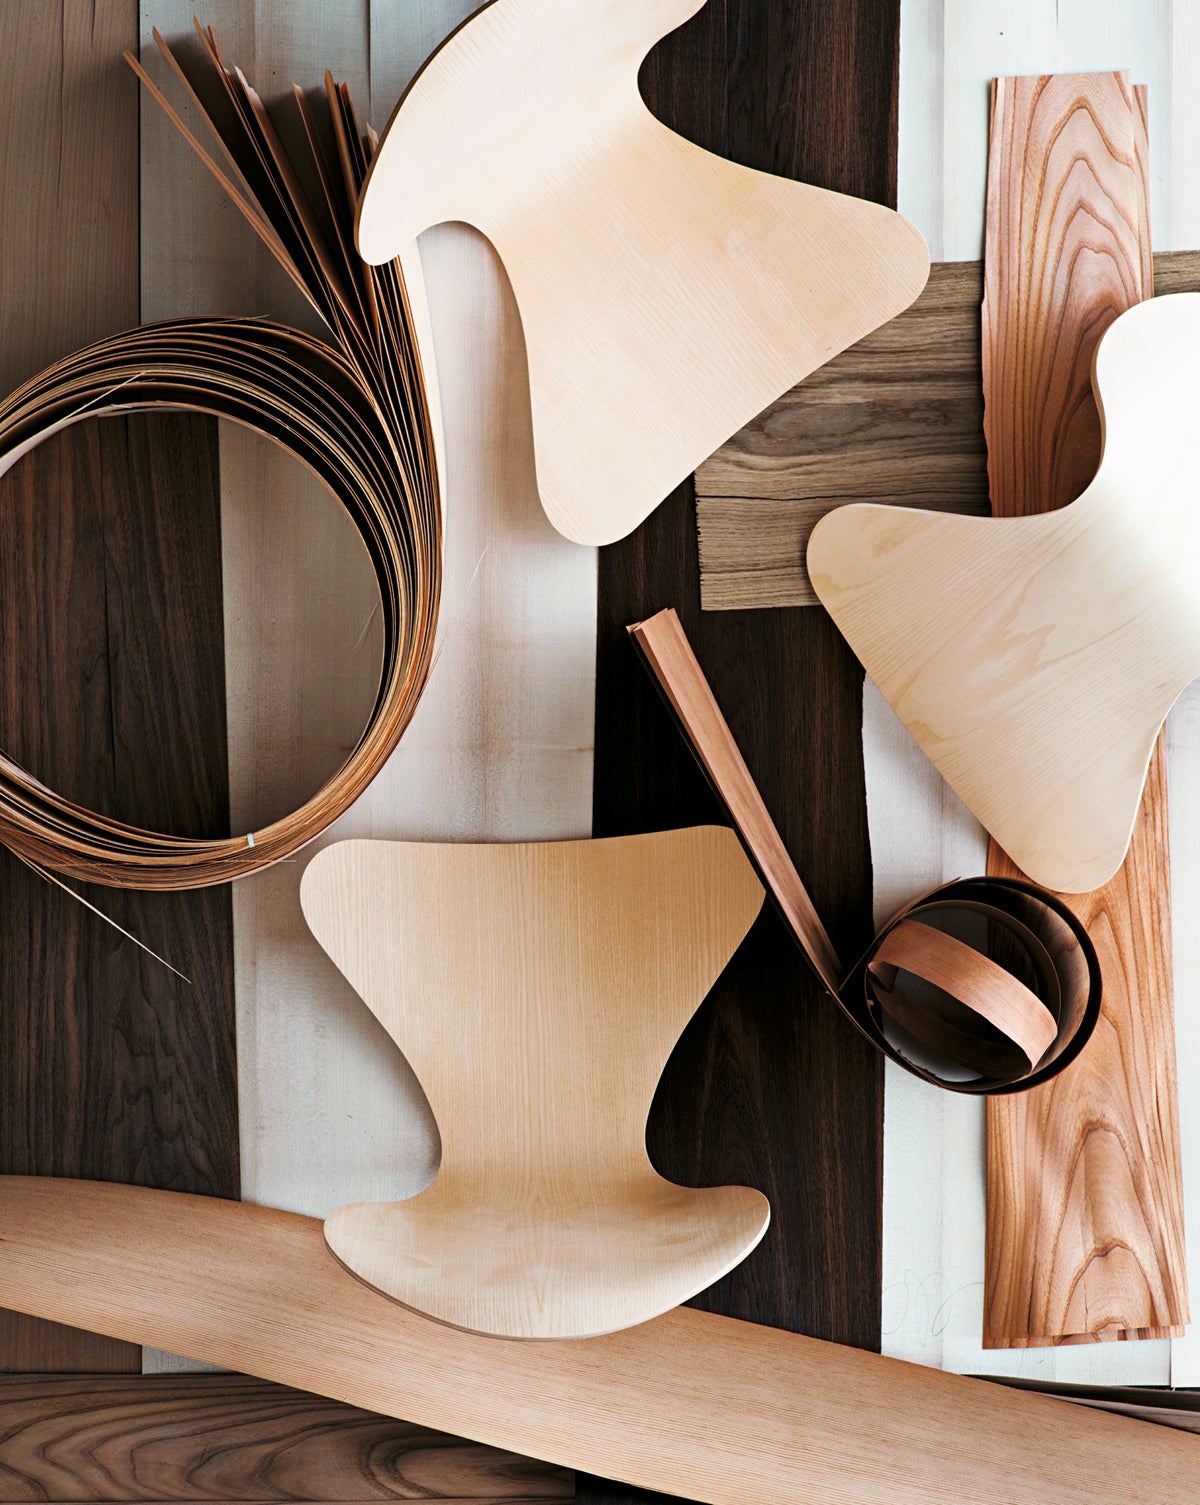 Many pieces of natural wood that construct an iconic Danish chair